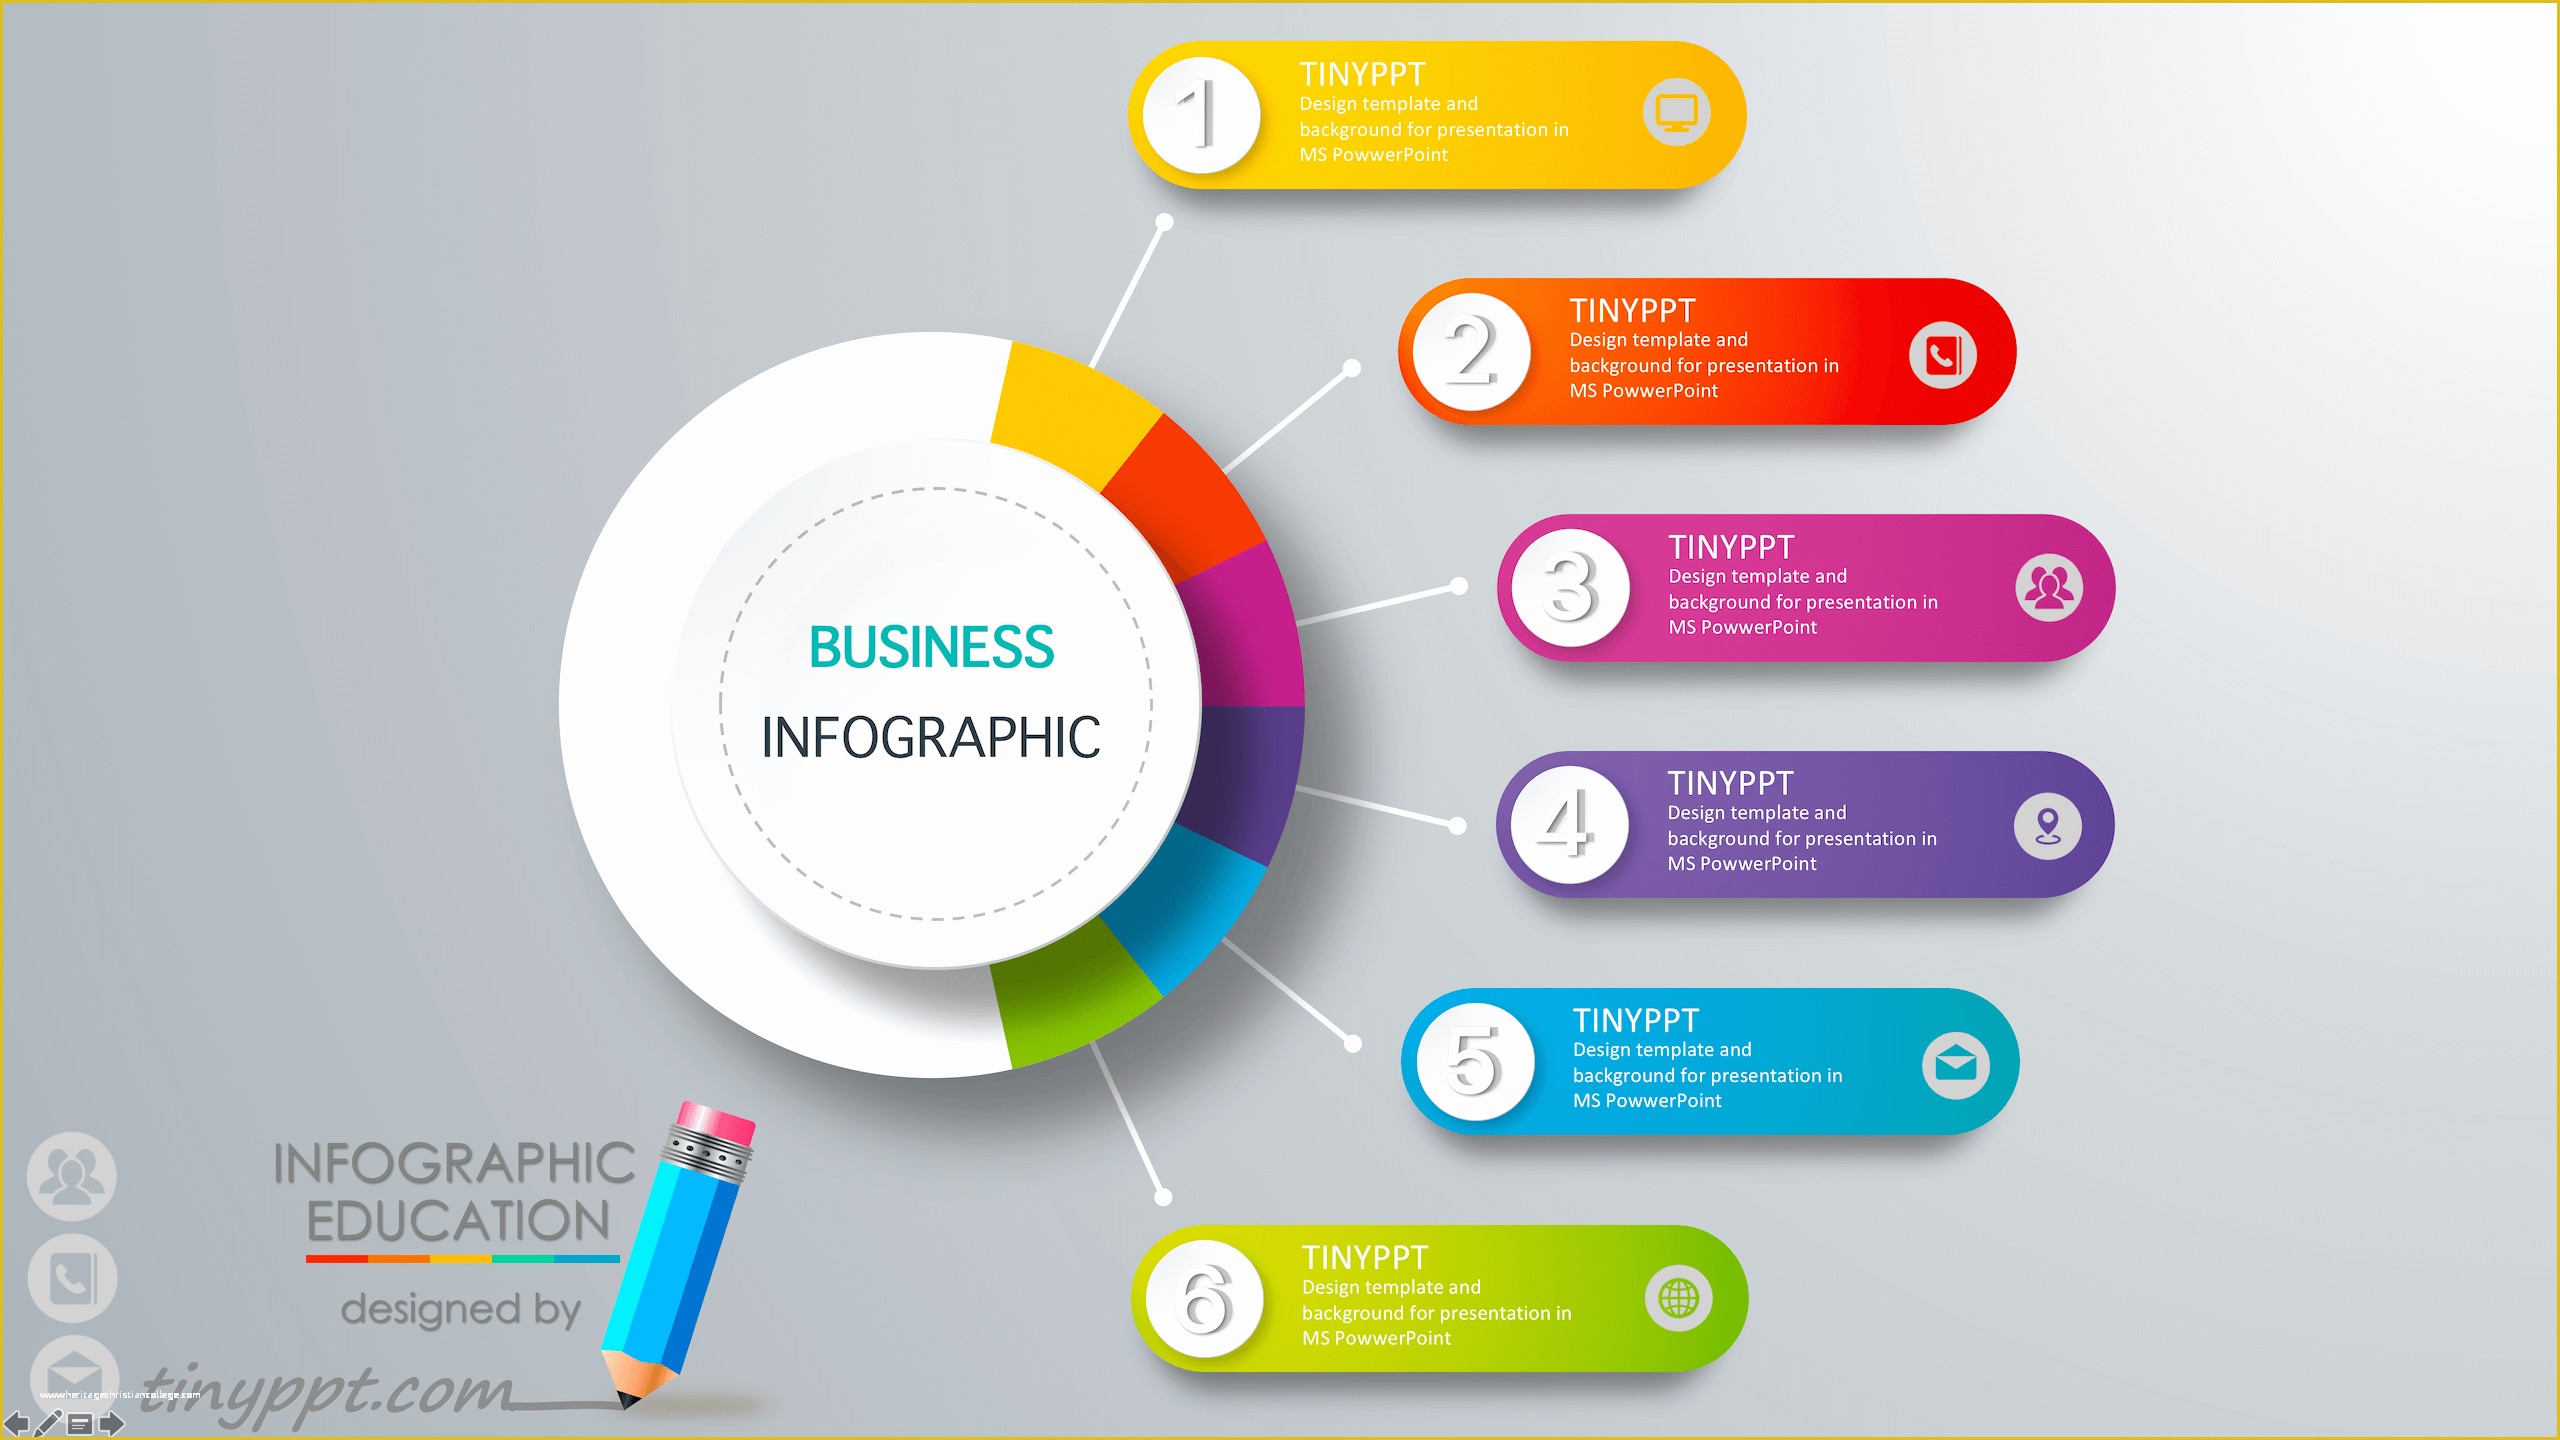 Free Powerpoint Slide Templates Of Powerpoint Infographic Icons Powerpoint Timeline Templates